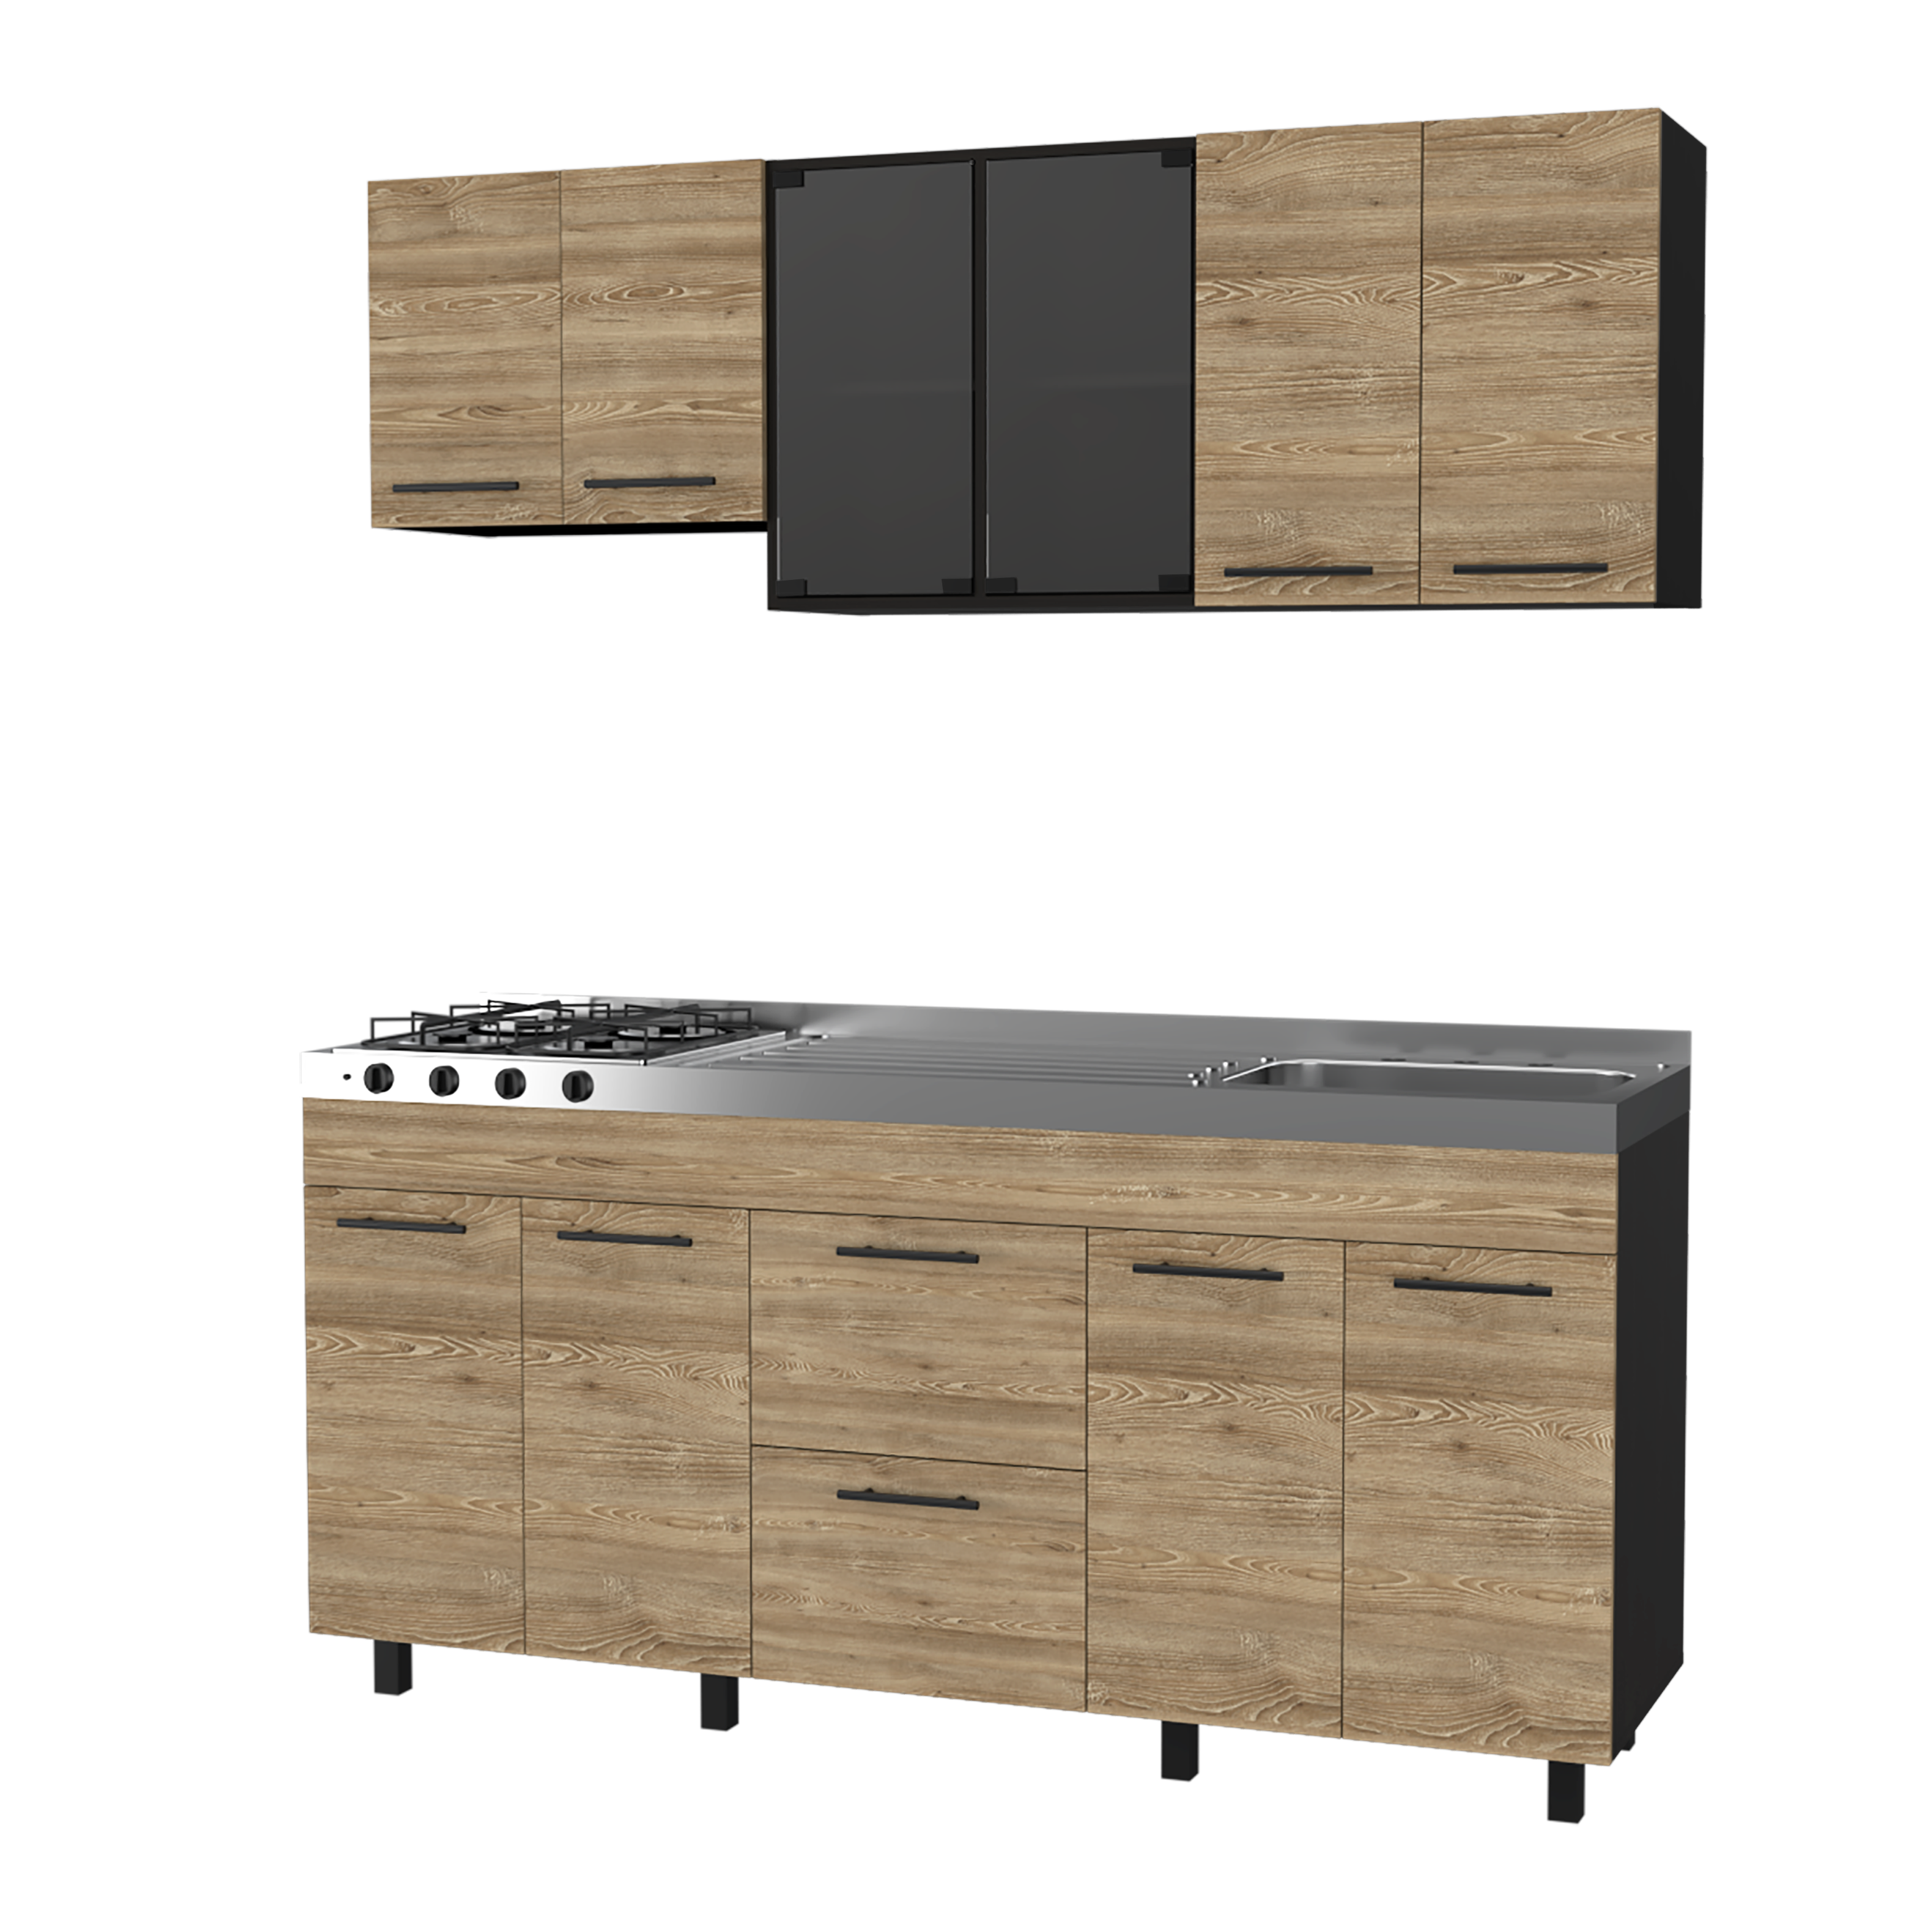 Luna Integral Kitchen, Includes Right Stainless Steel Countertop